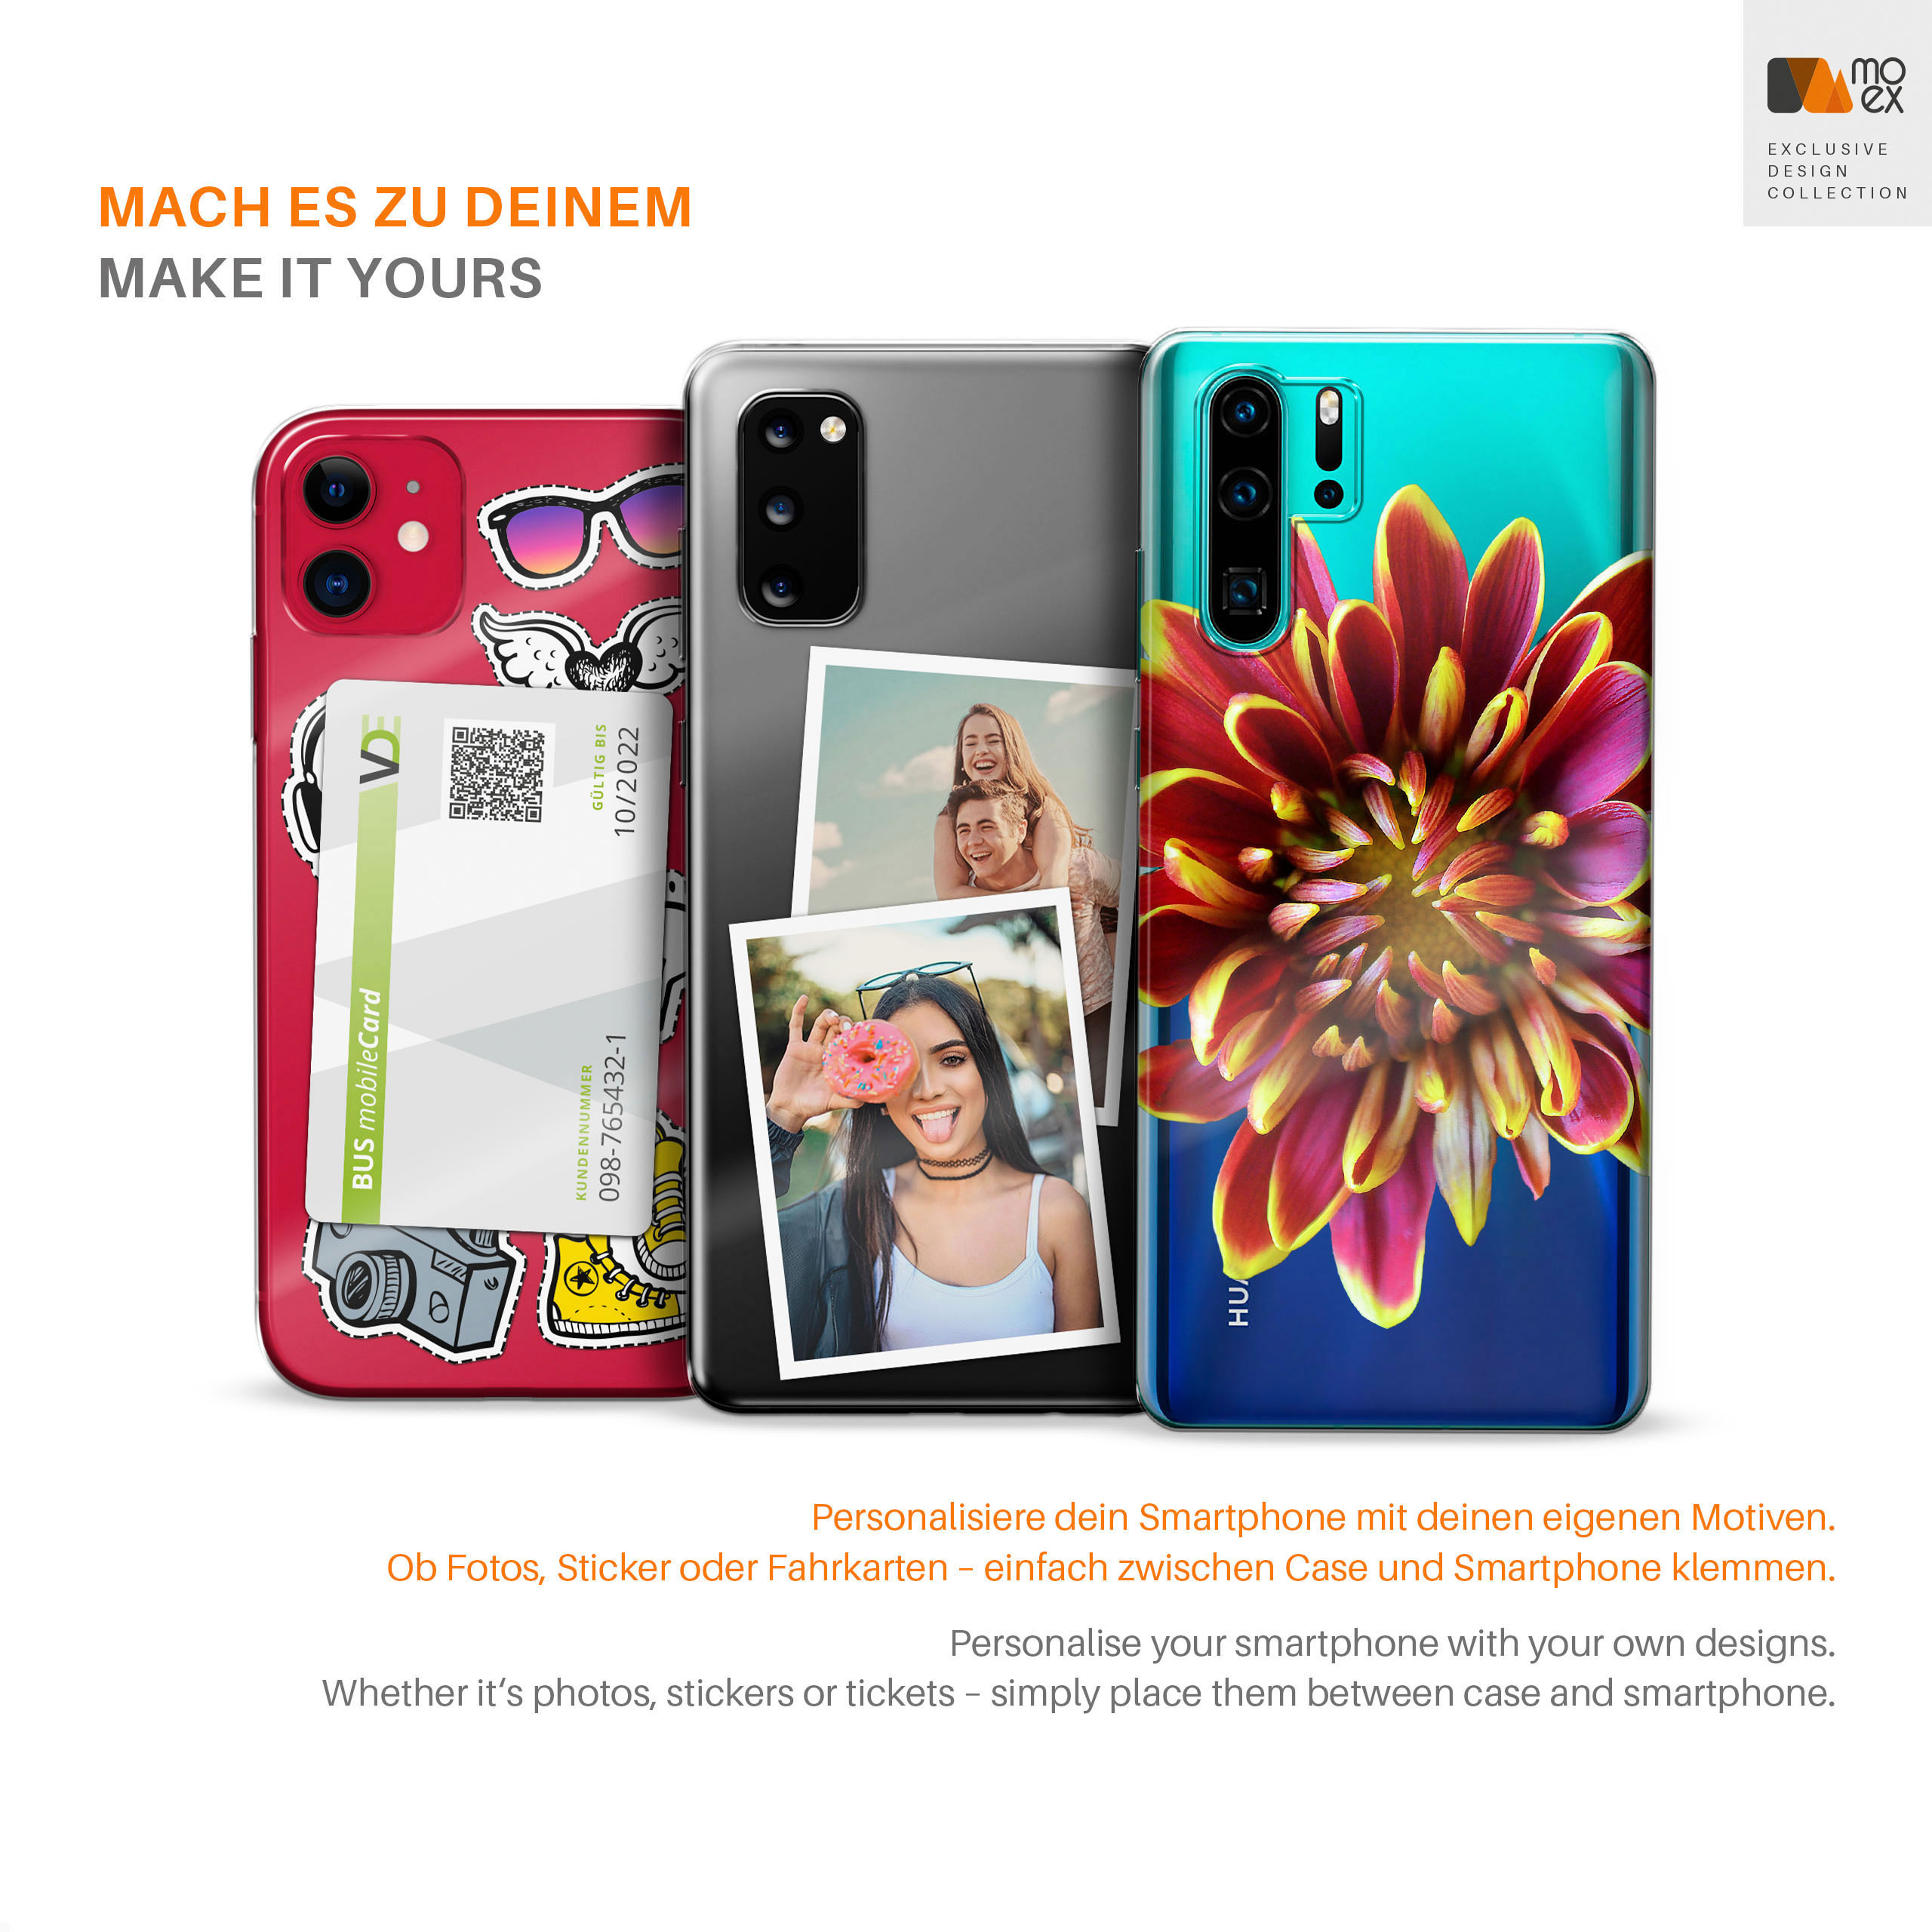 Crystal-Clear Backcover, Huawei, MOEX Aero Case, Honor View 10,